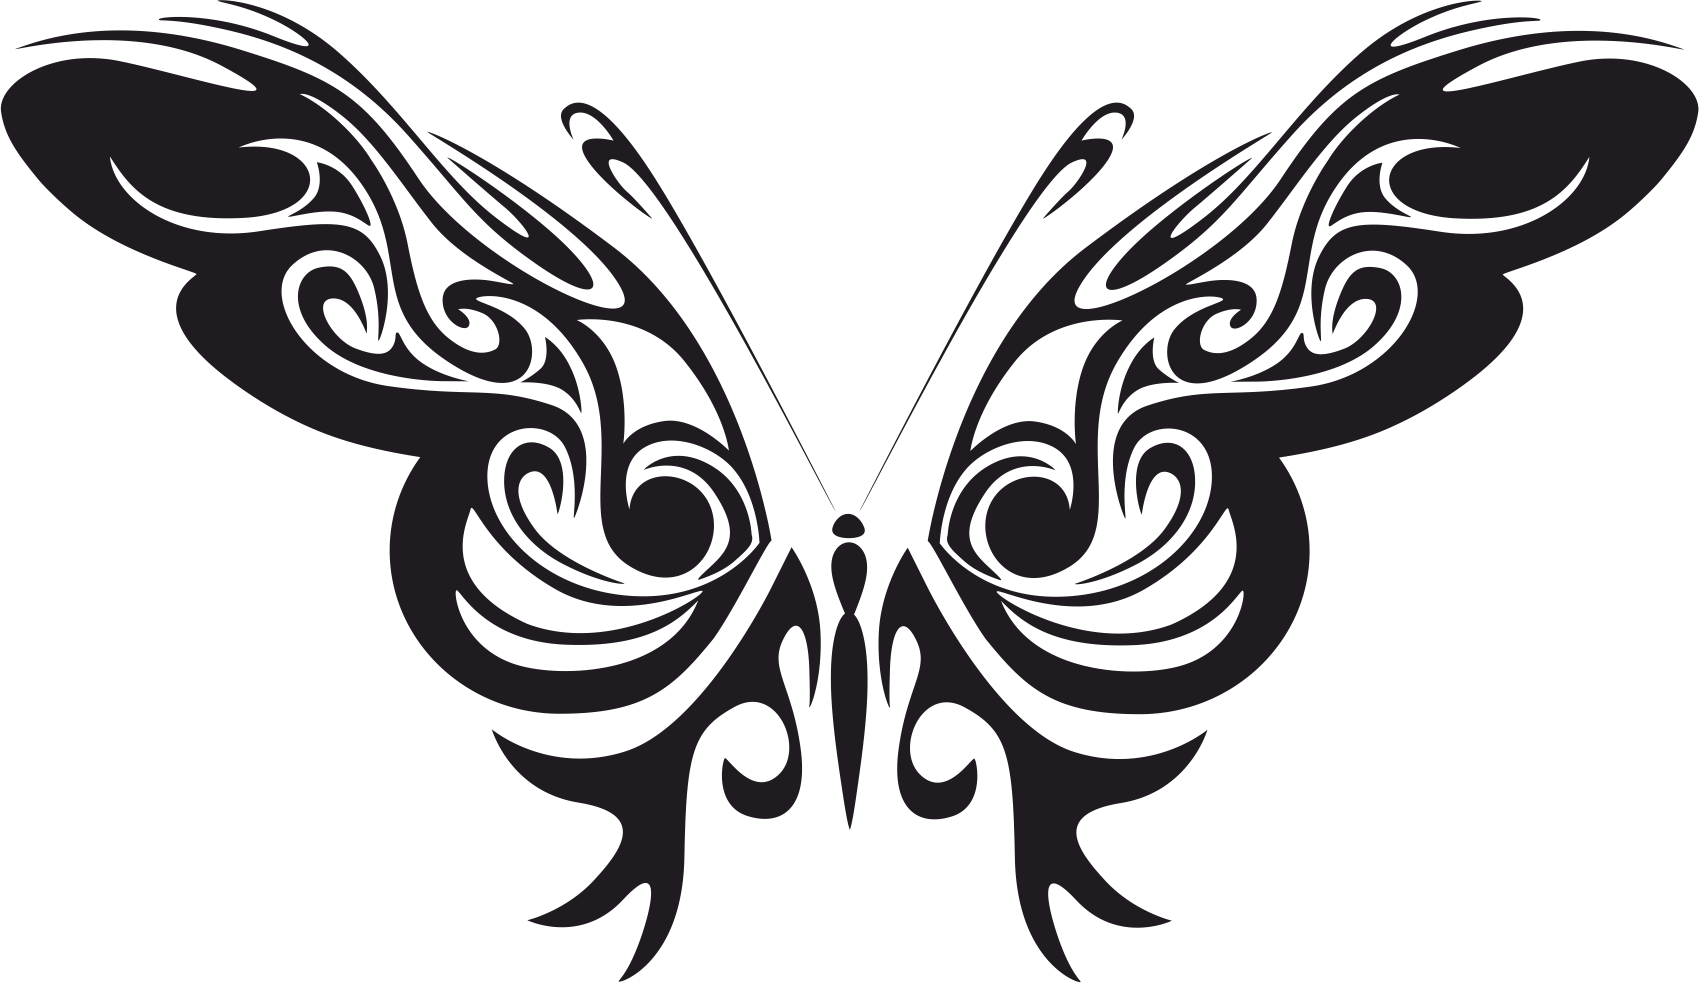 Download Tribal Butterfly Vector Art Free Vector cdr Download ...